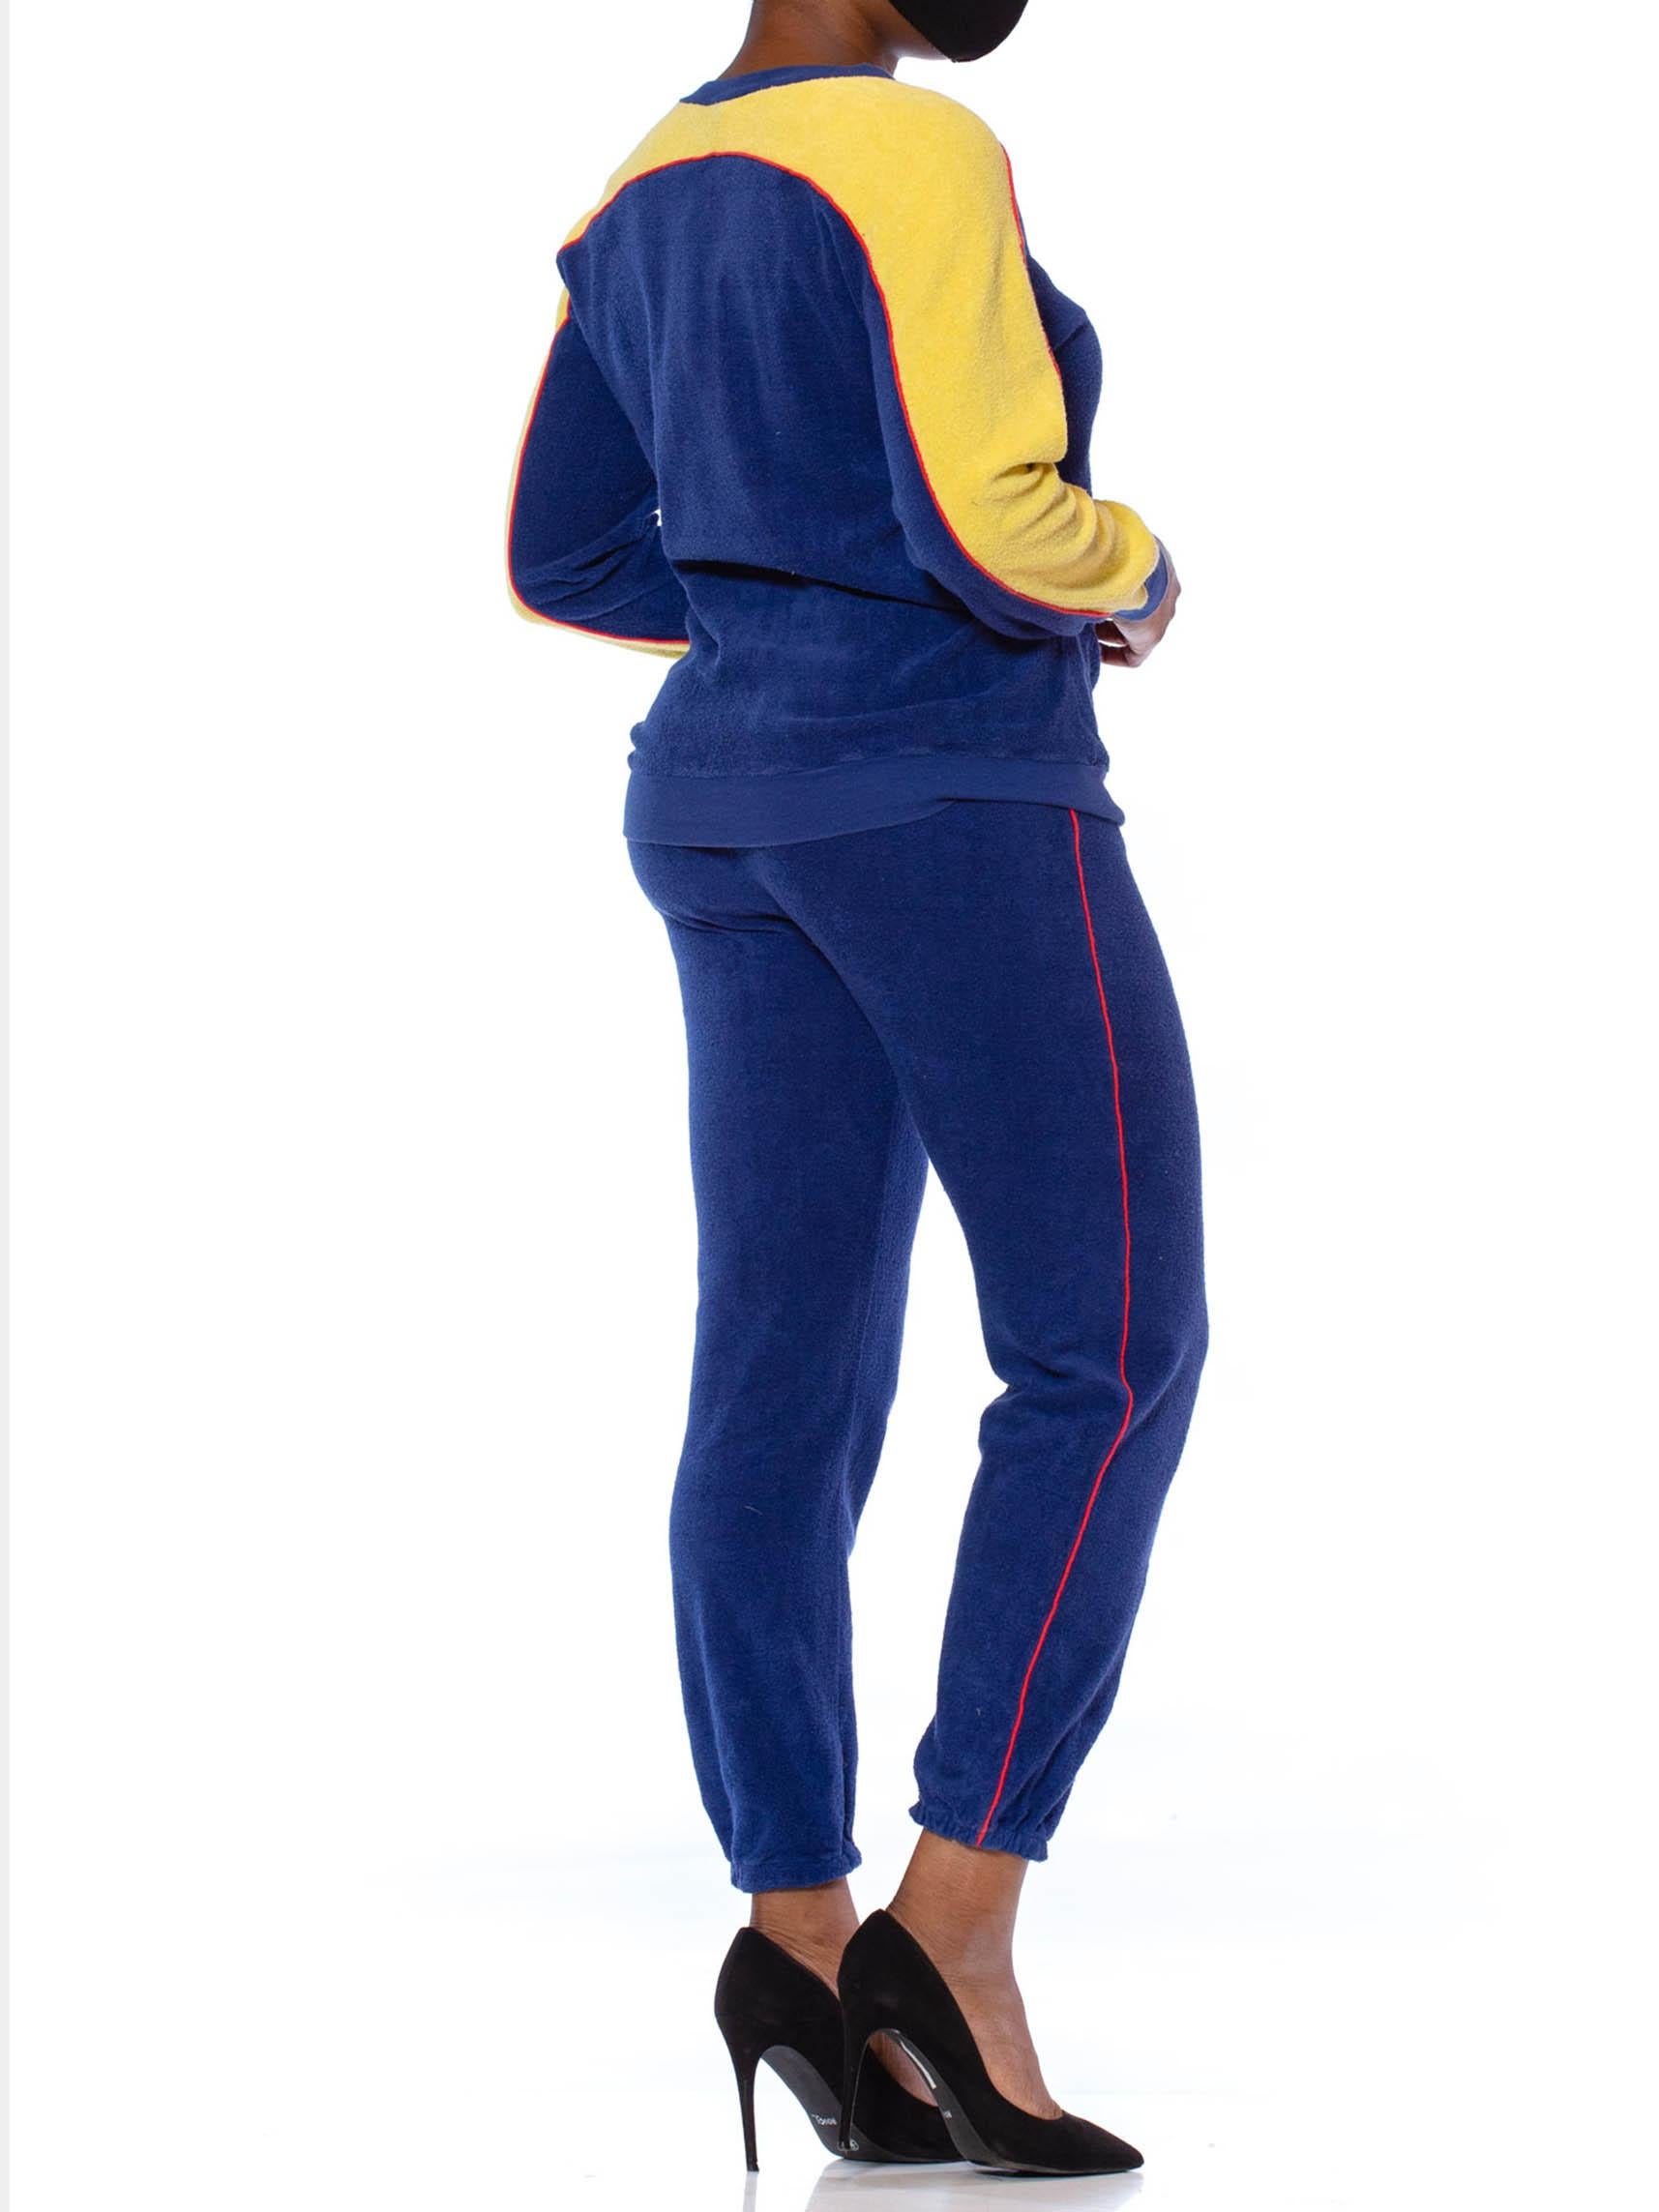 blue and yellow track suit